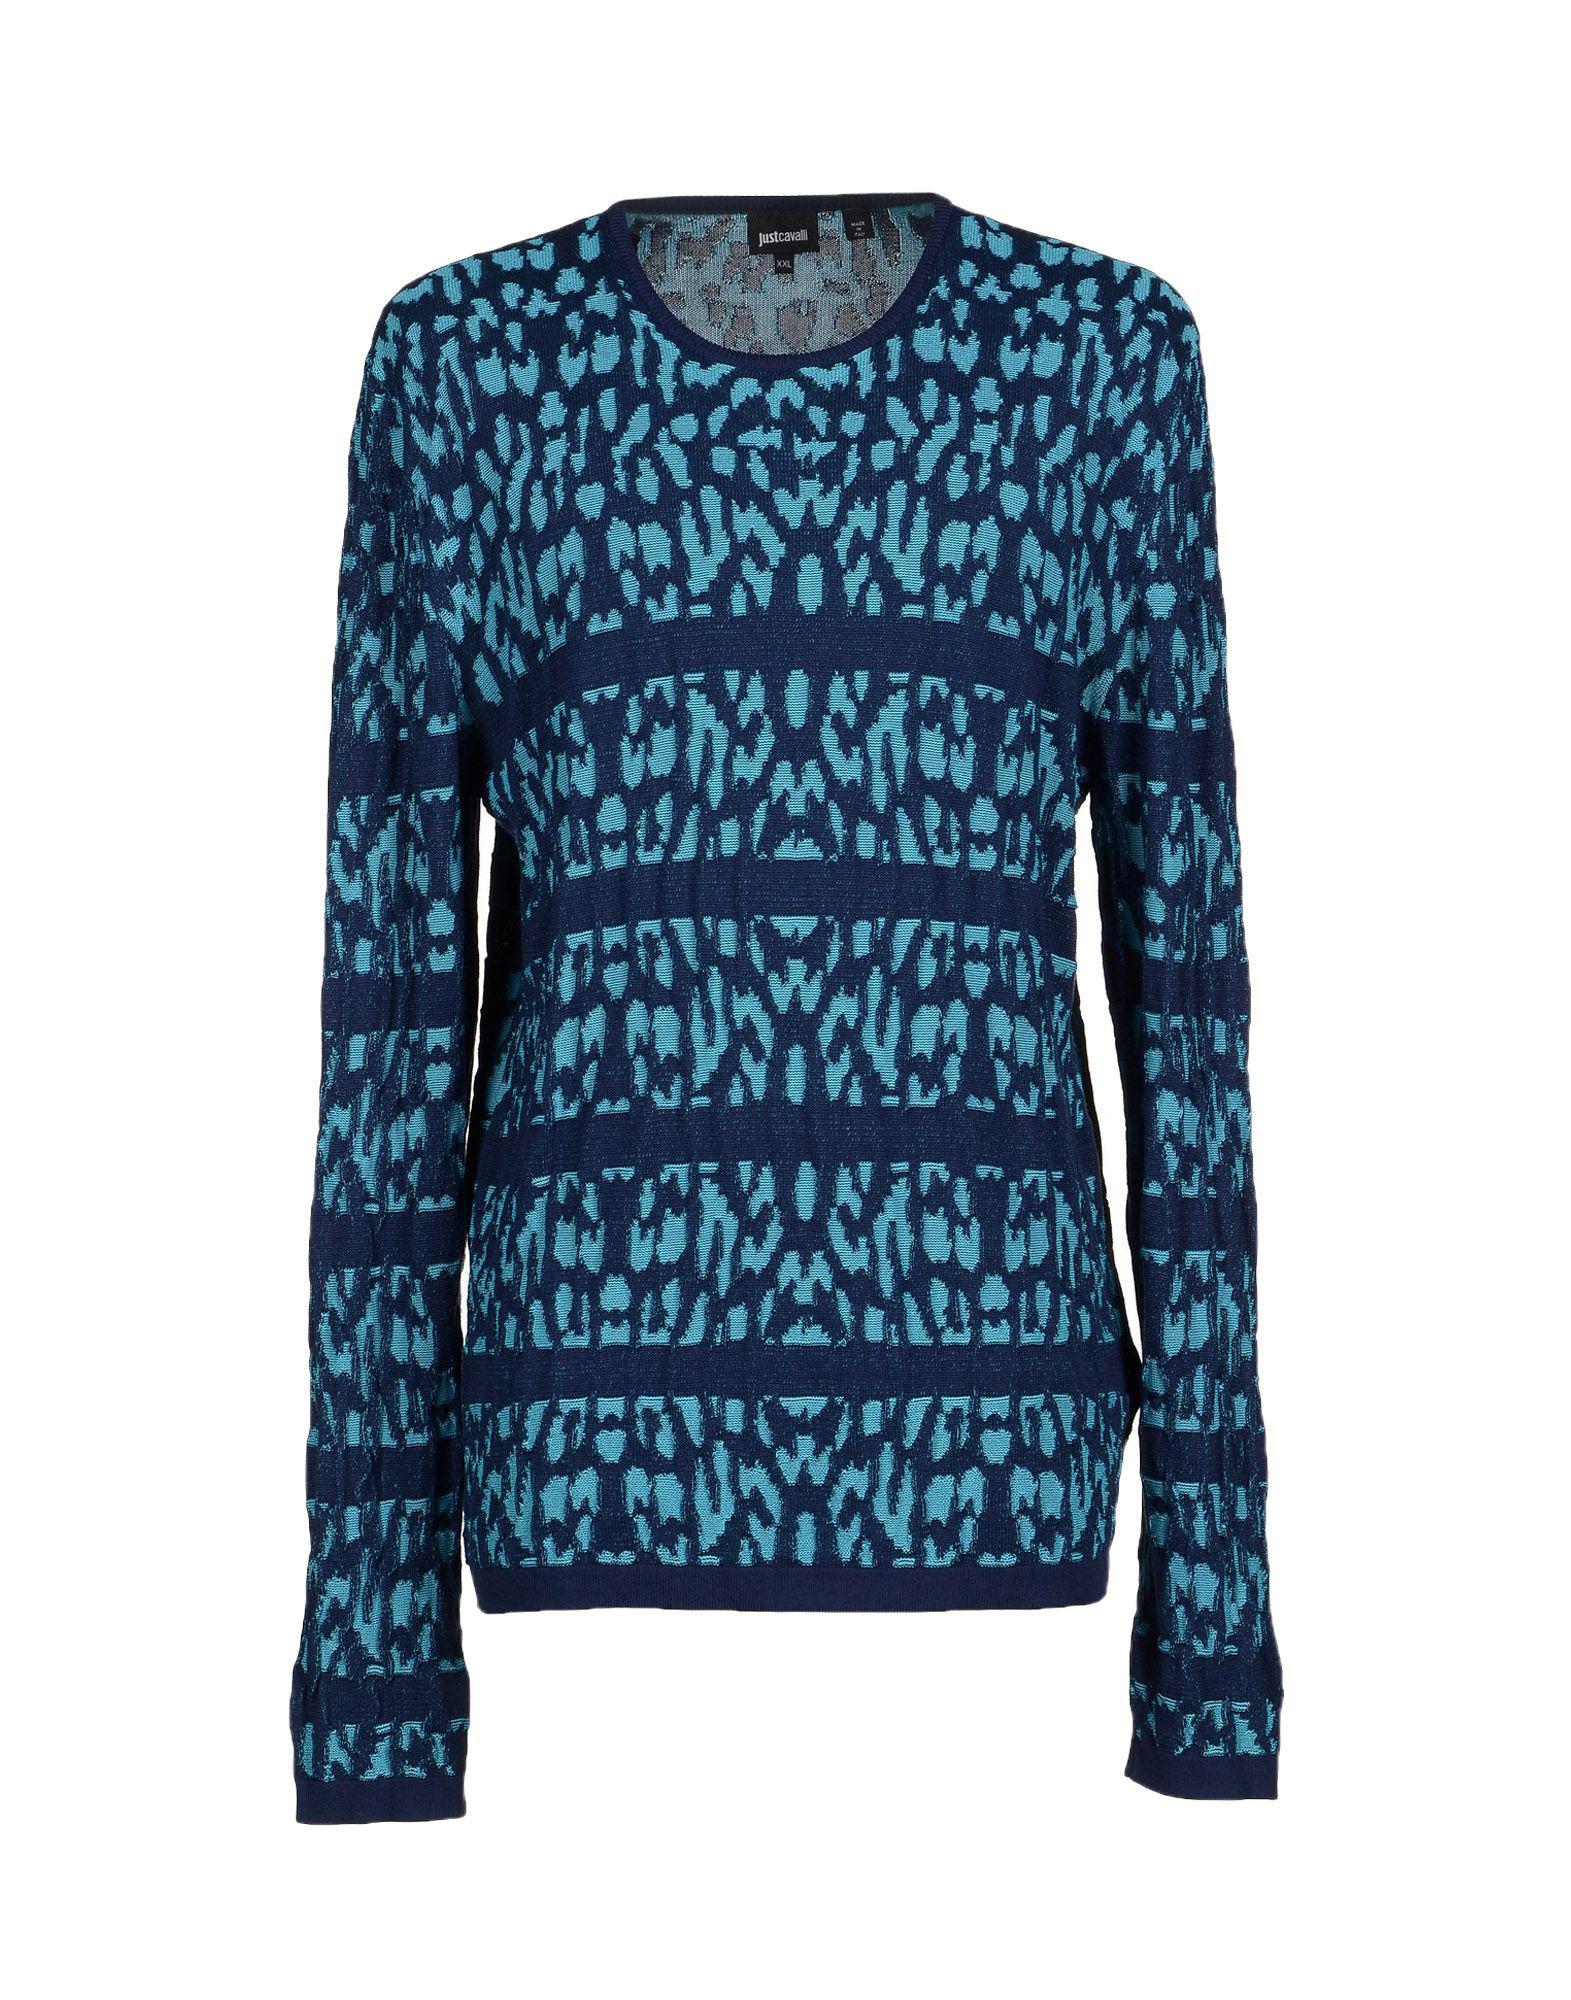 Lyst - Just Cavalli Sweater in Blue for Men